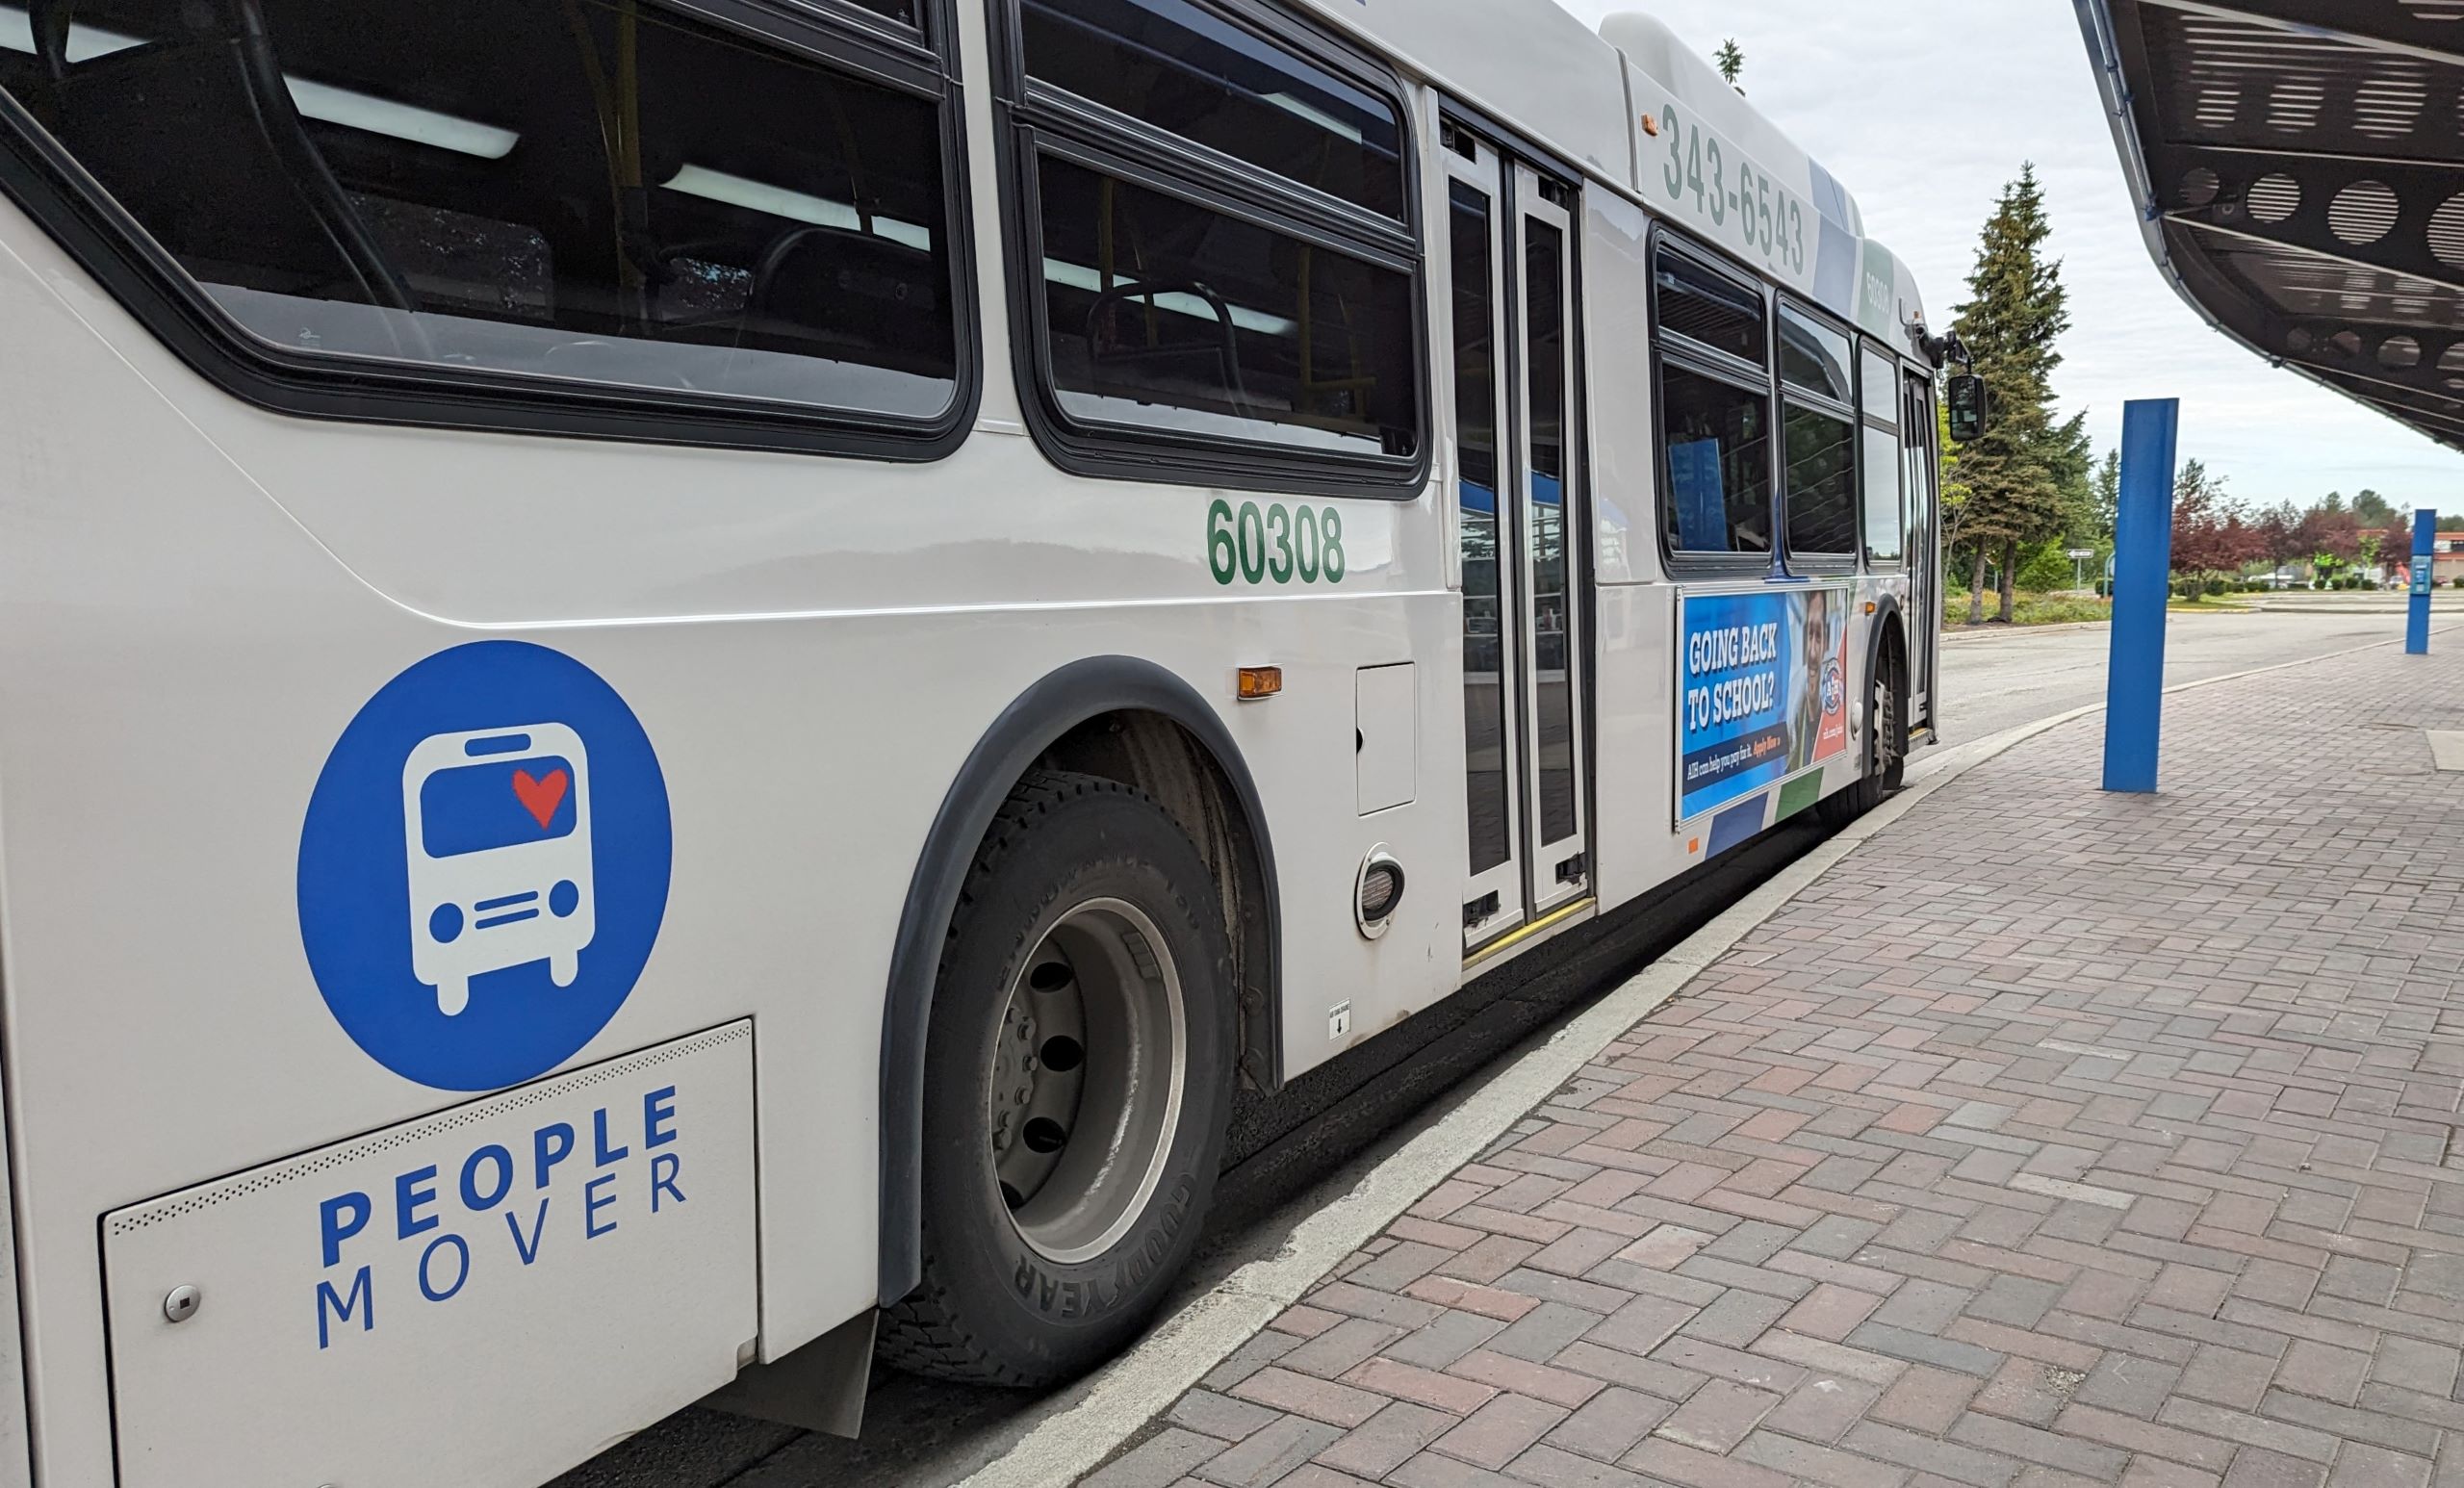 A bus with a "People Mover" logo